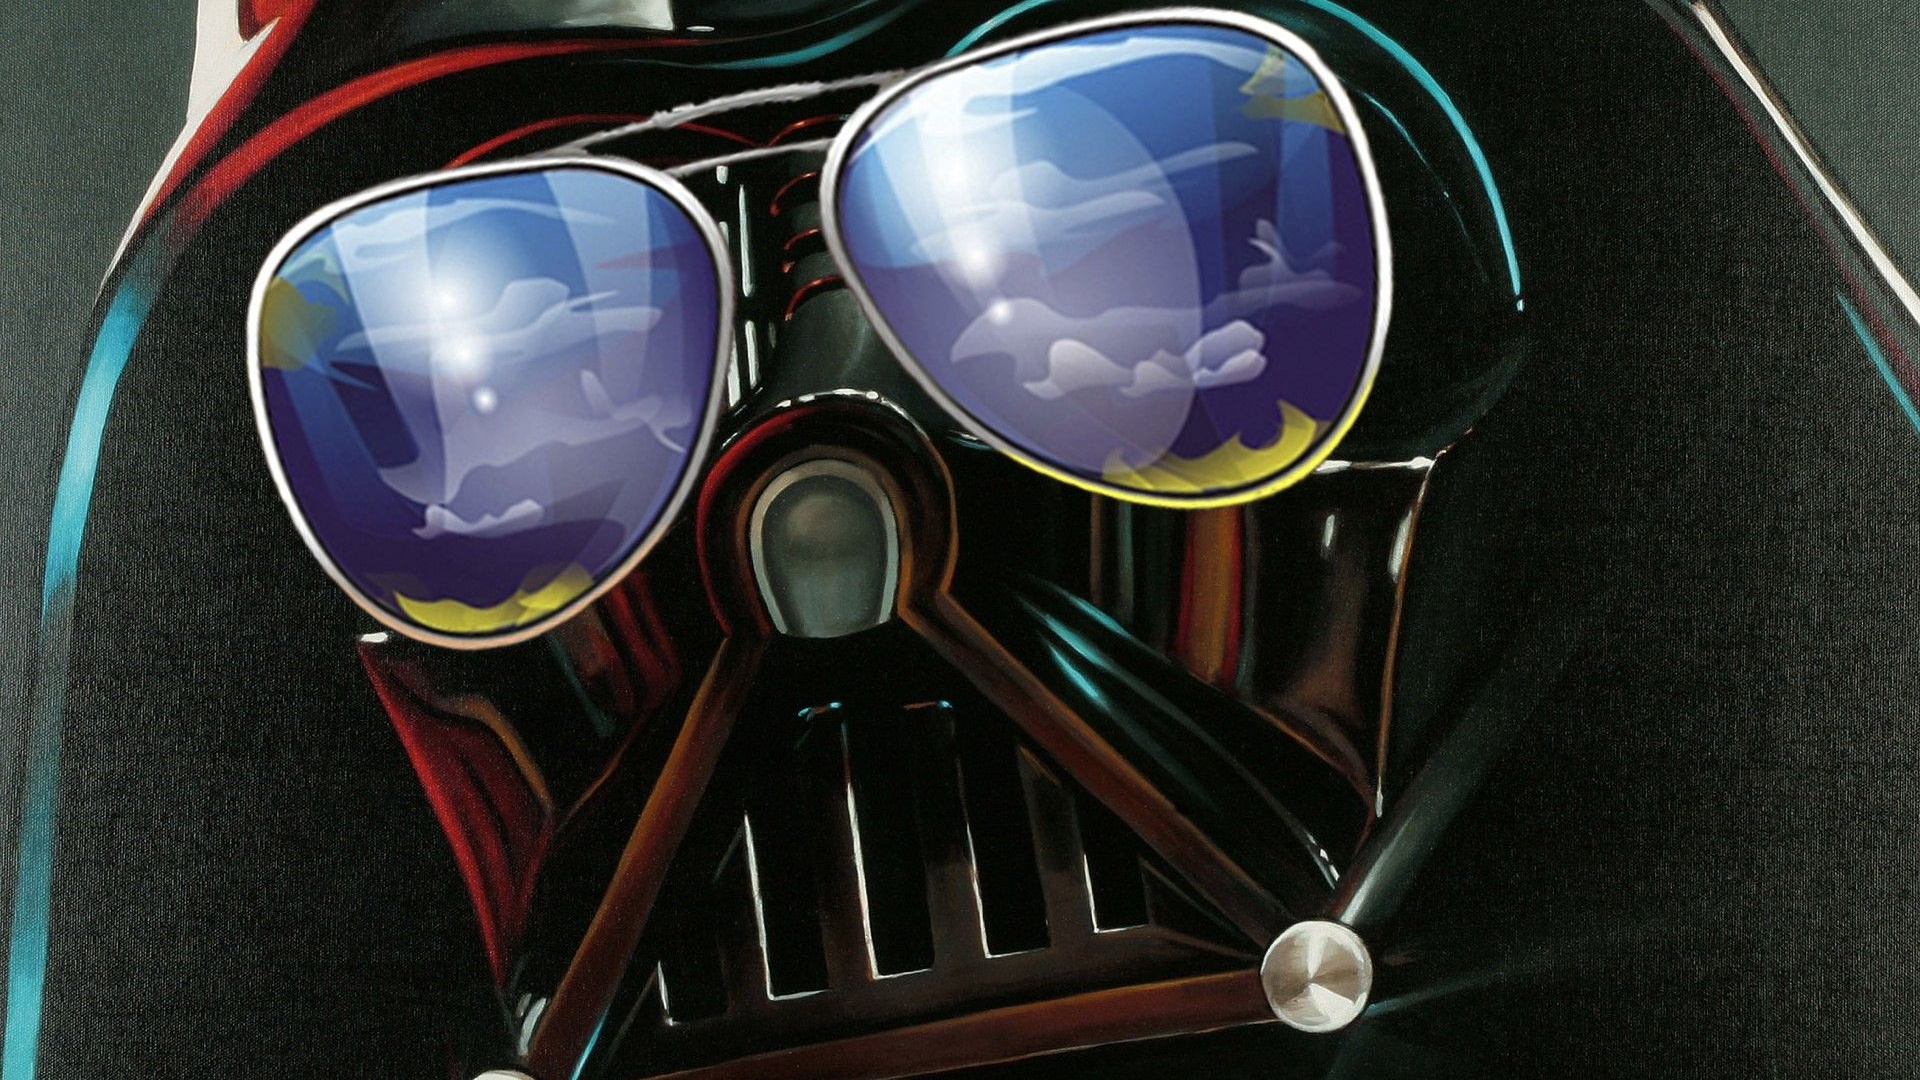 Star Wars Darth Vader Funny Sunglasses Glamour Faces